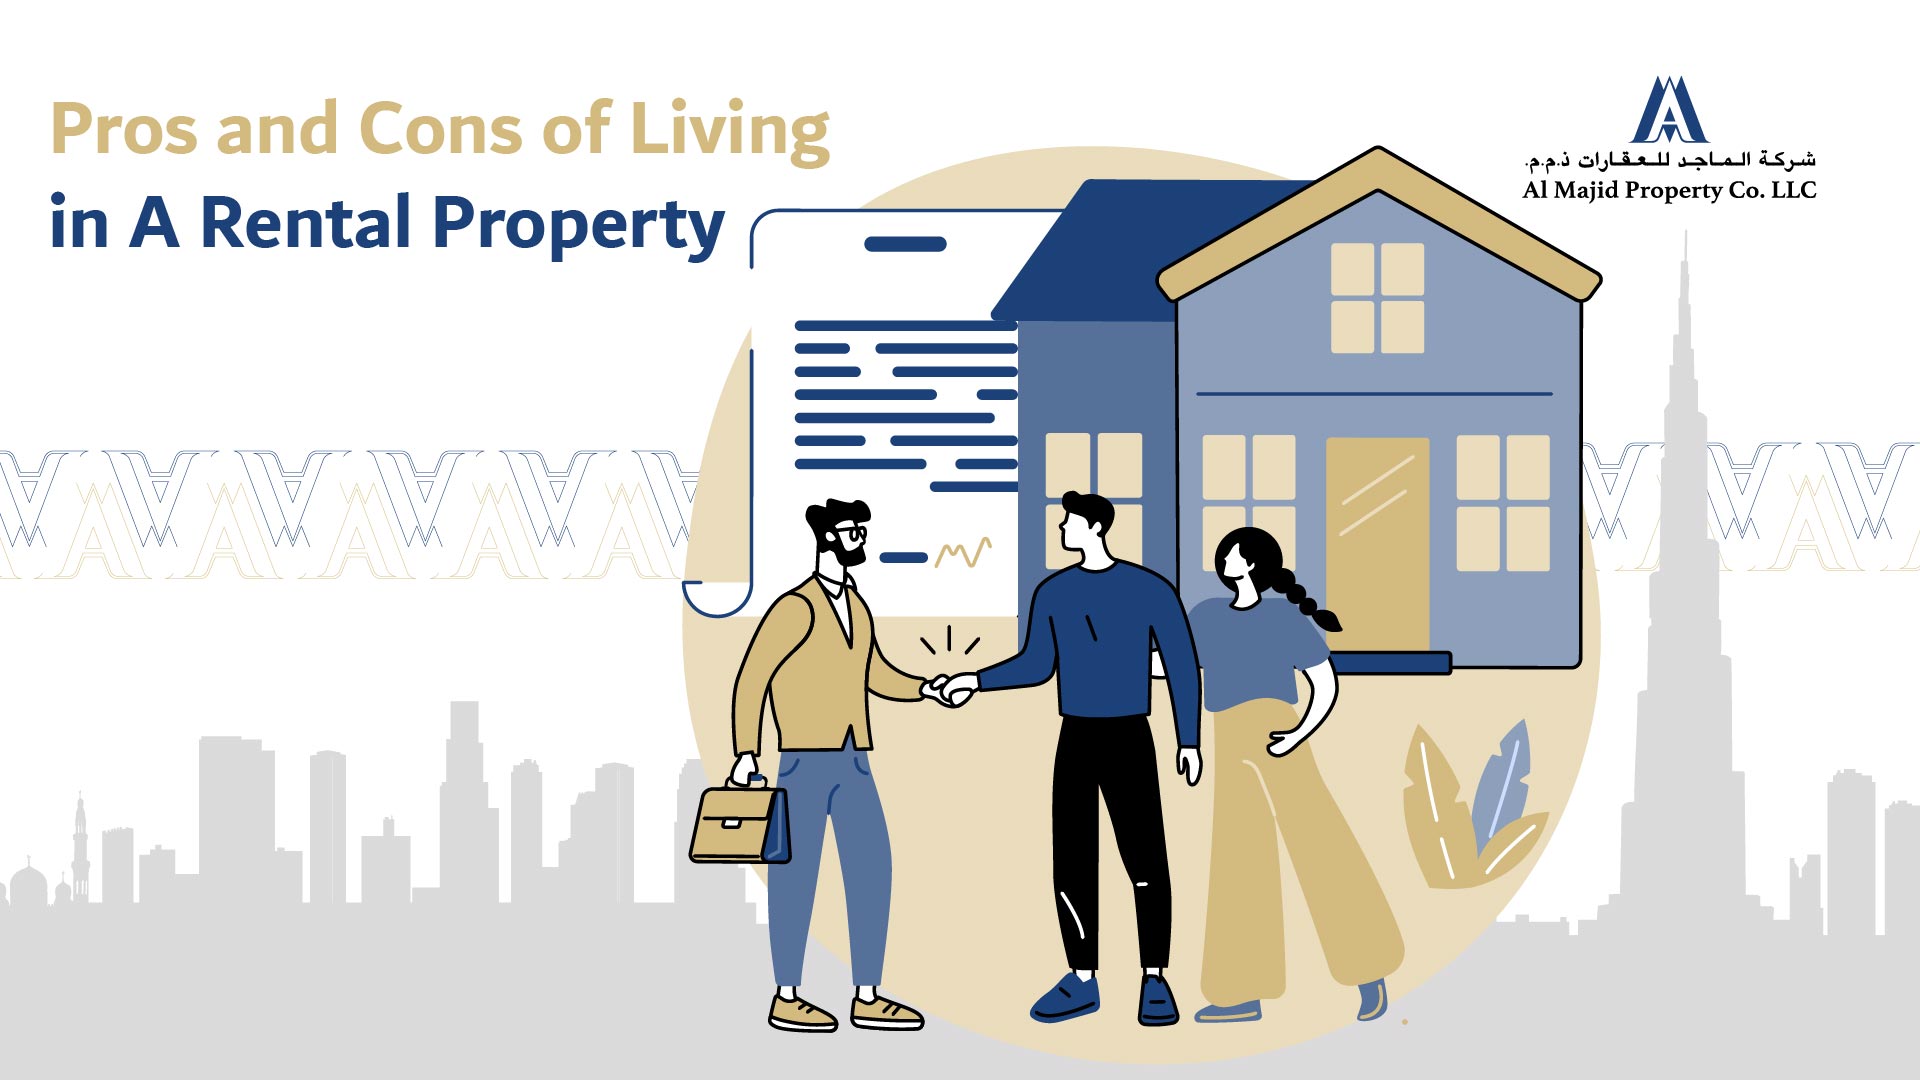 Pros and Cons of Living in A Rental Property